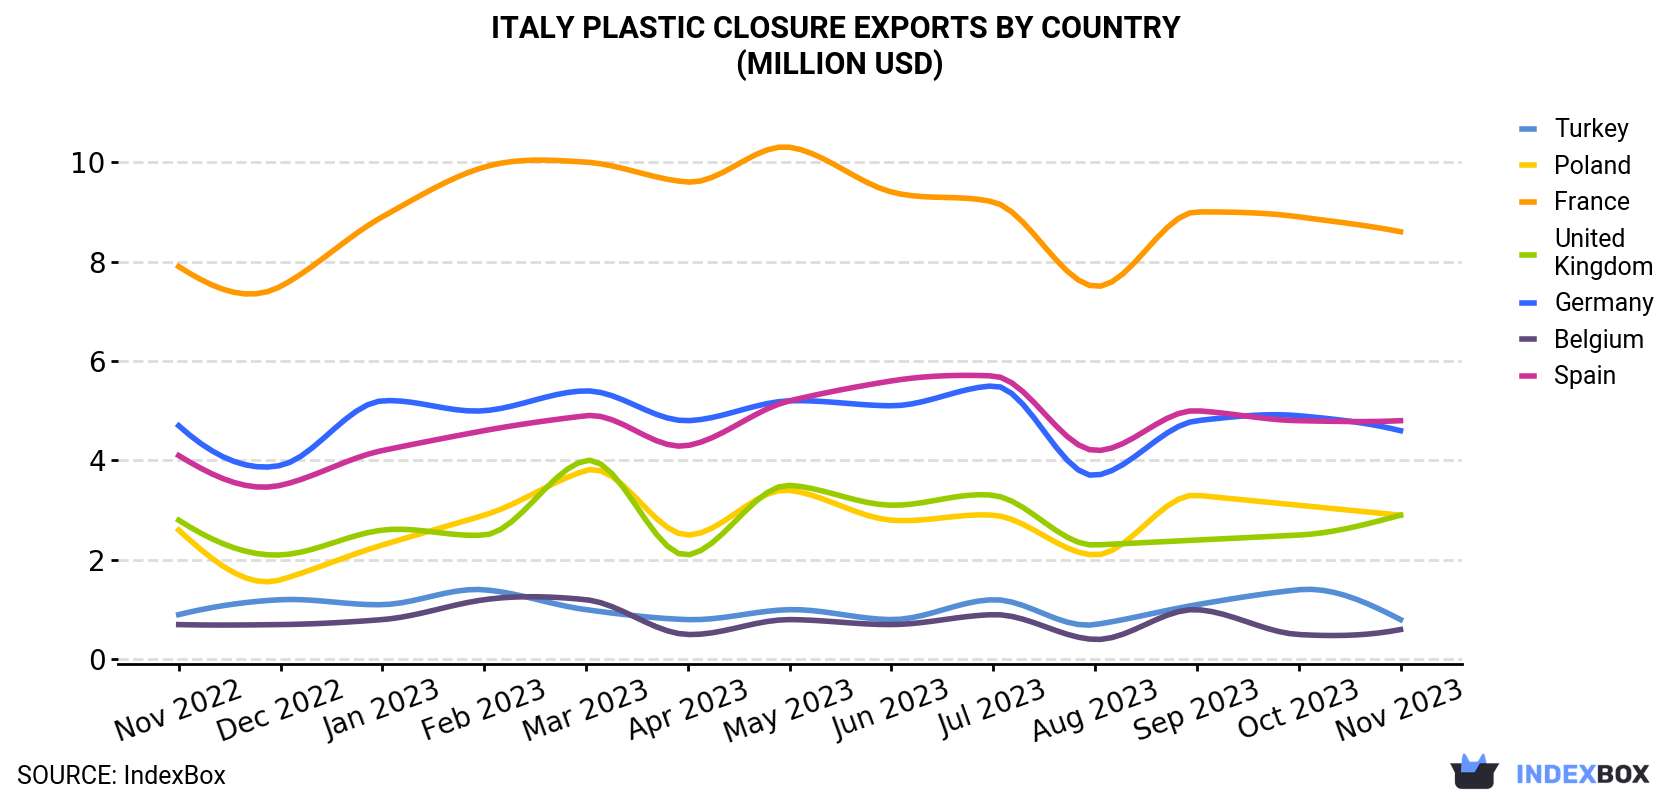 Italy Plastic Closure Exports By Country (Million USD)